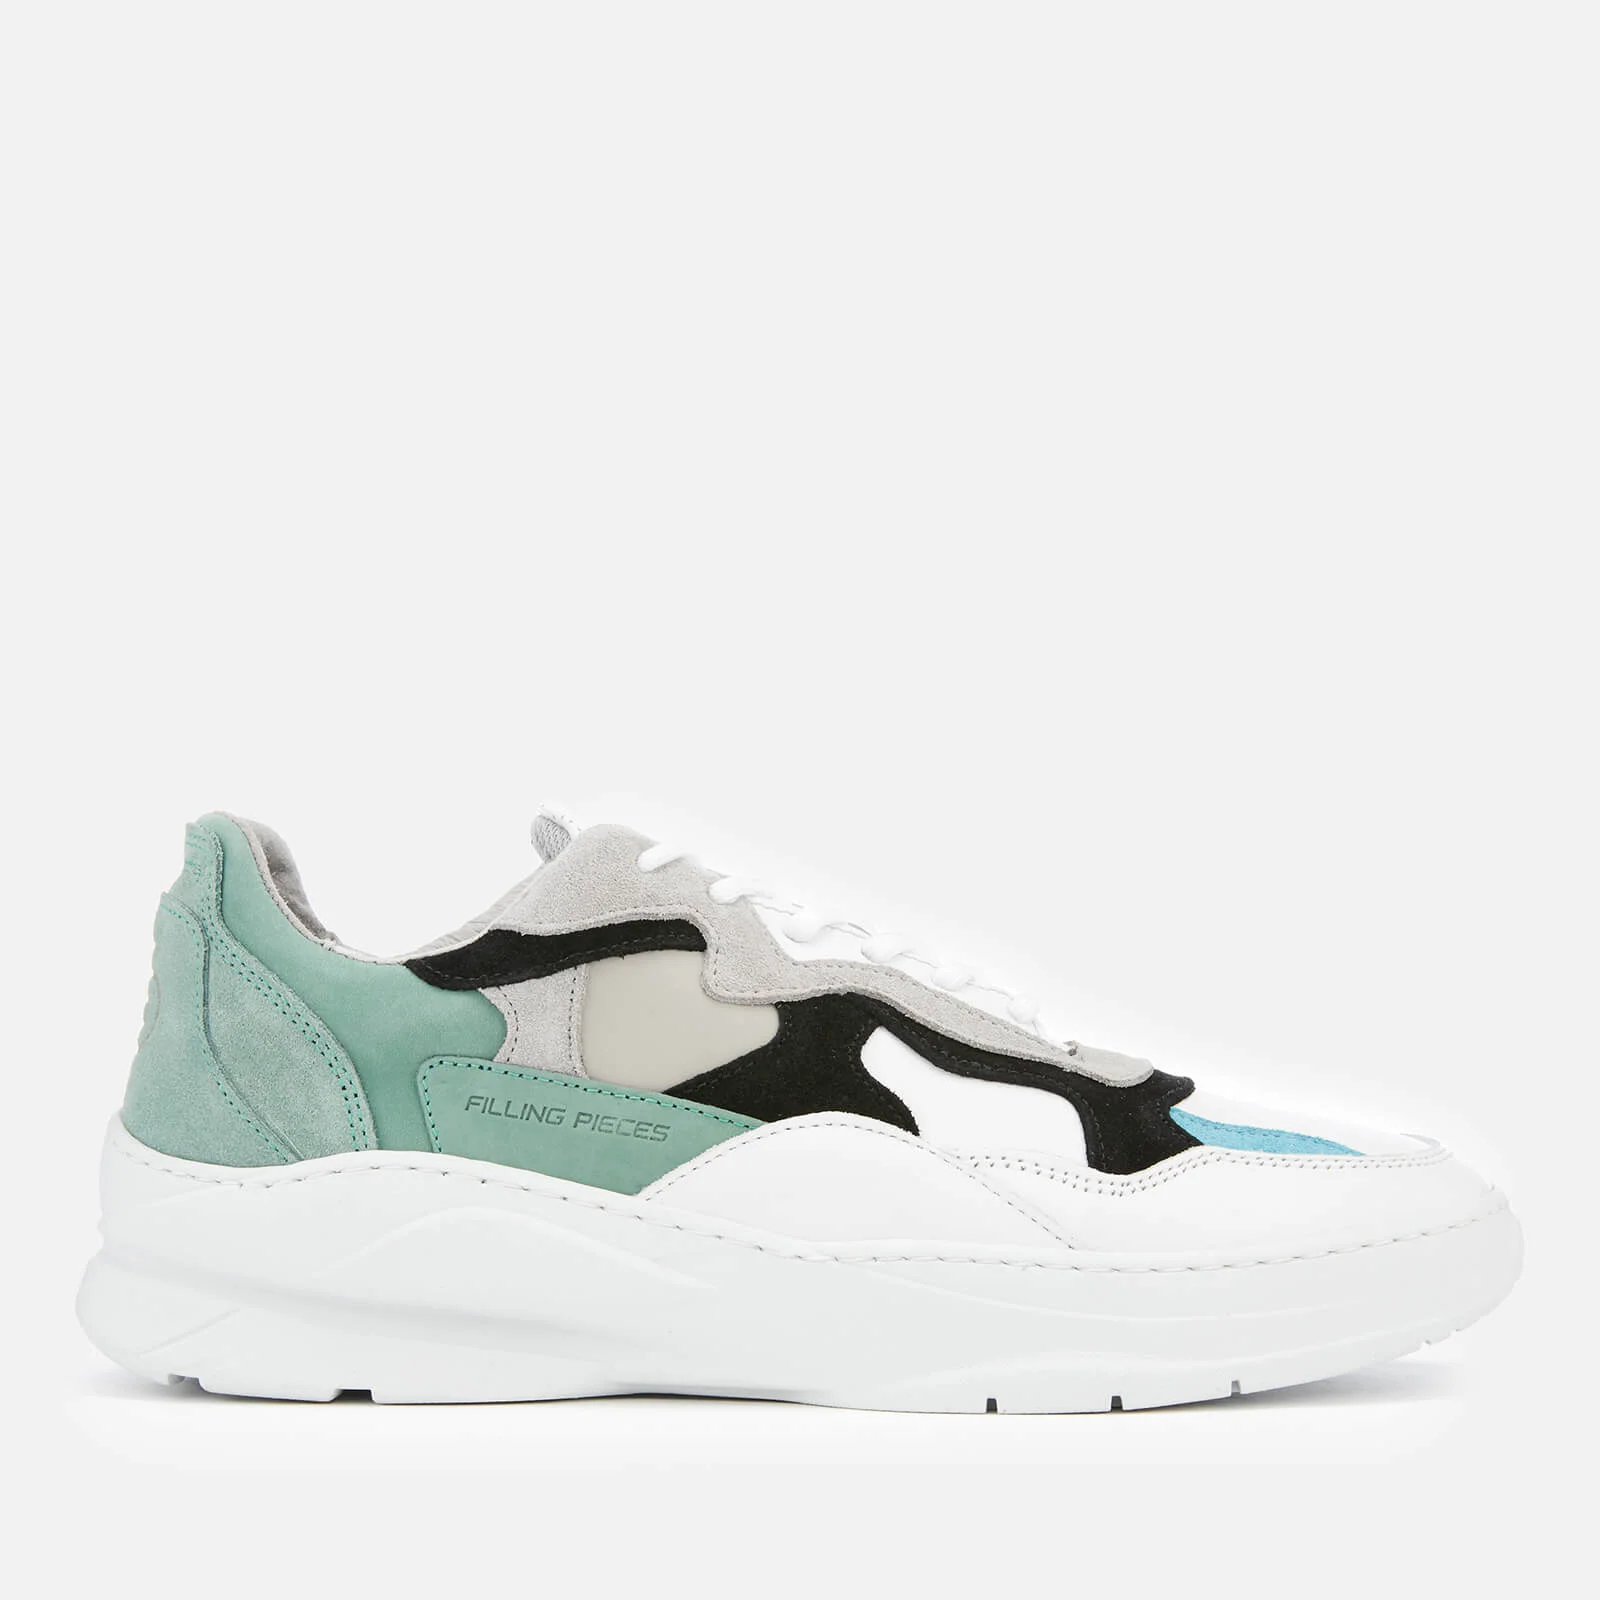 Filling Pieces Men's Cosmo Infinity Trainers - Mint Image 1